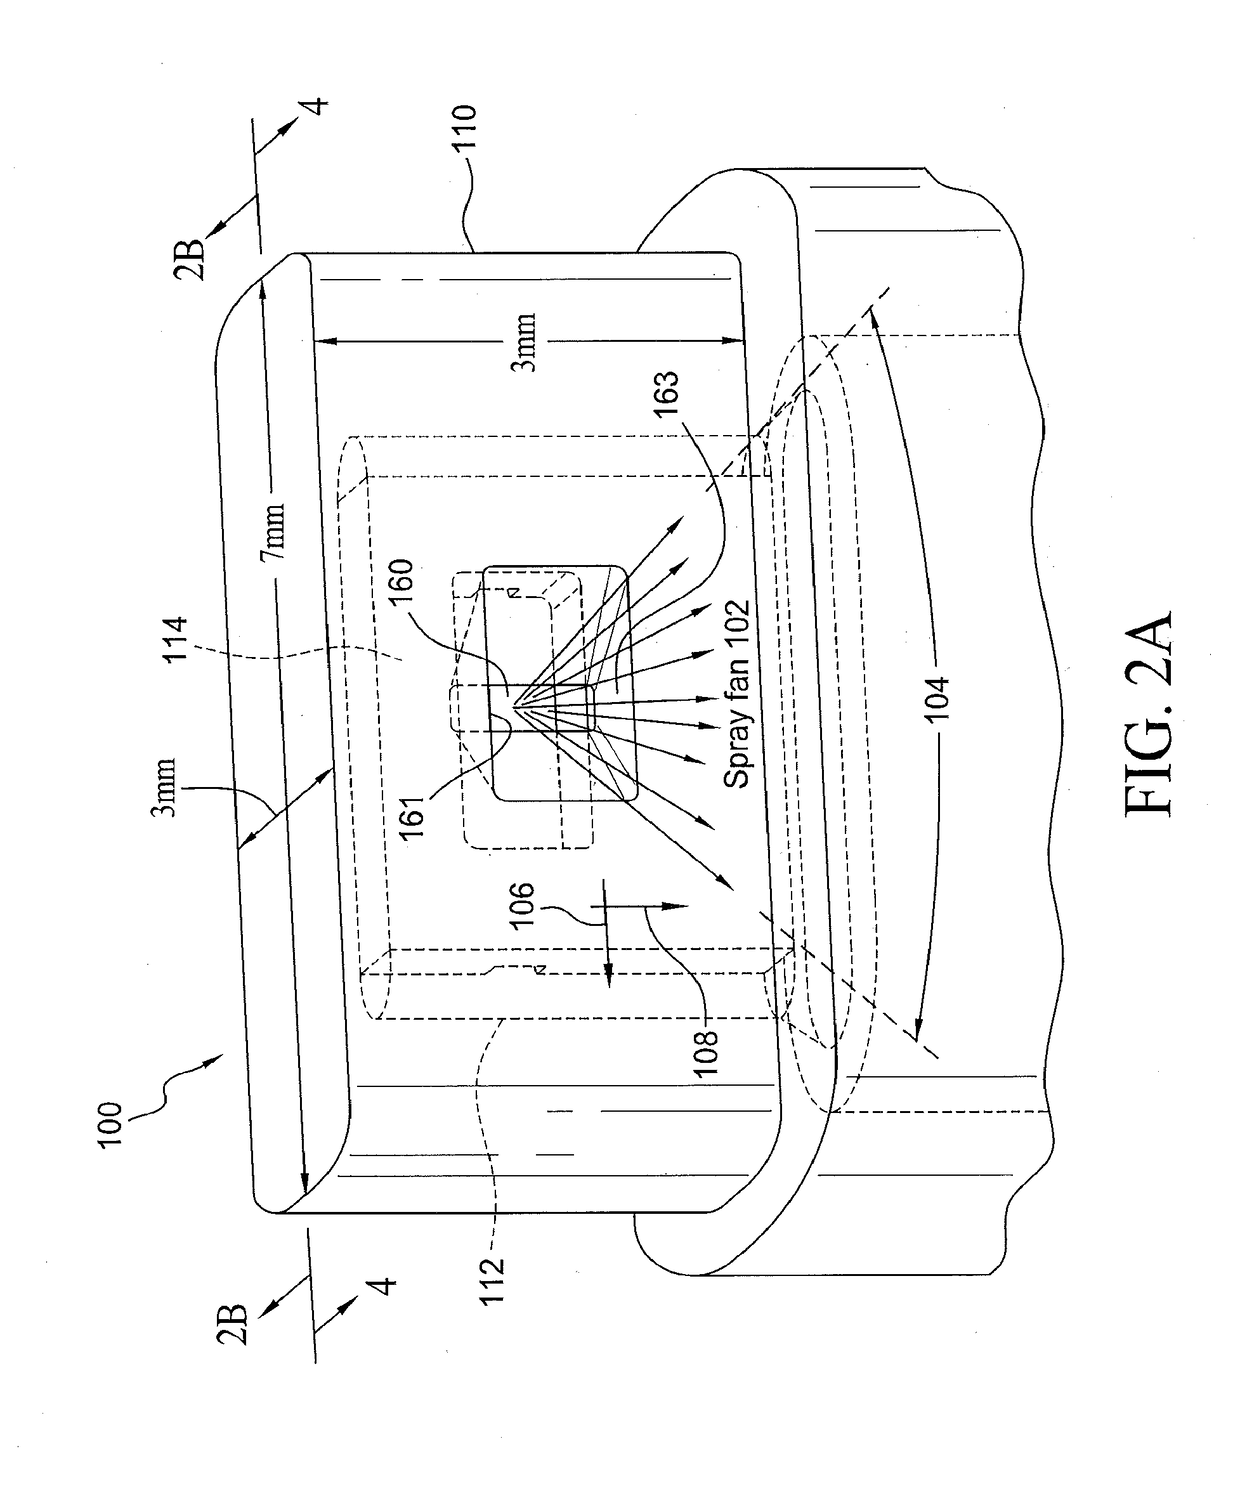 Micro-sized structure and construction method for fluidic oscillator wash nozzle